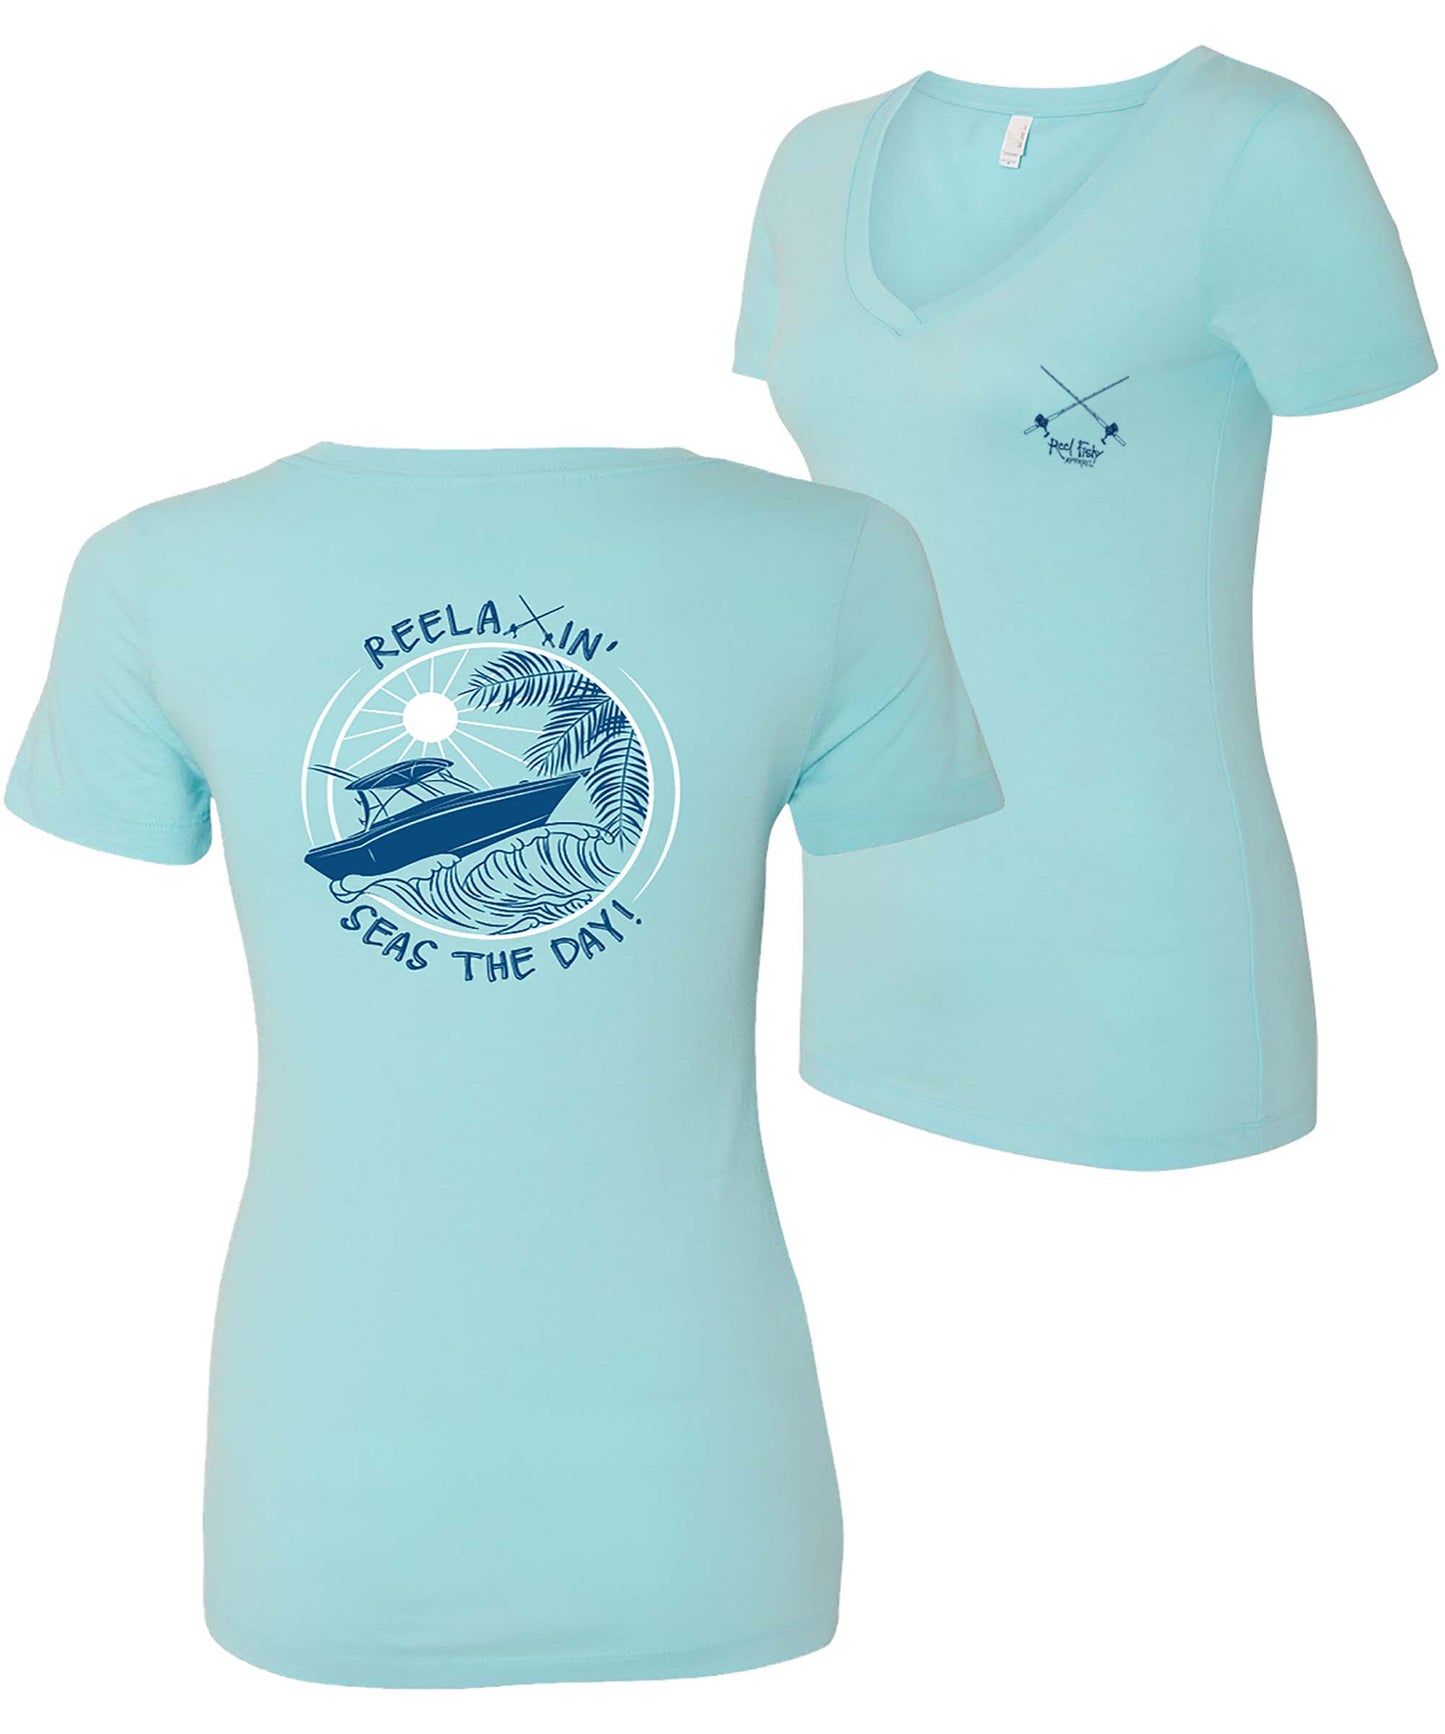 Ladies Reelaxin' - Seas the Day v-neck cotton shirt in Cancun Blue